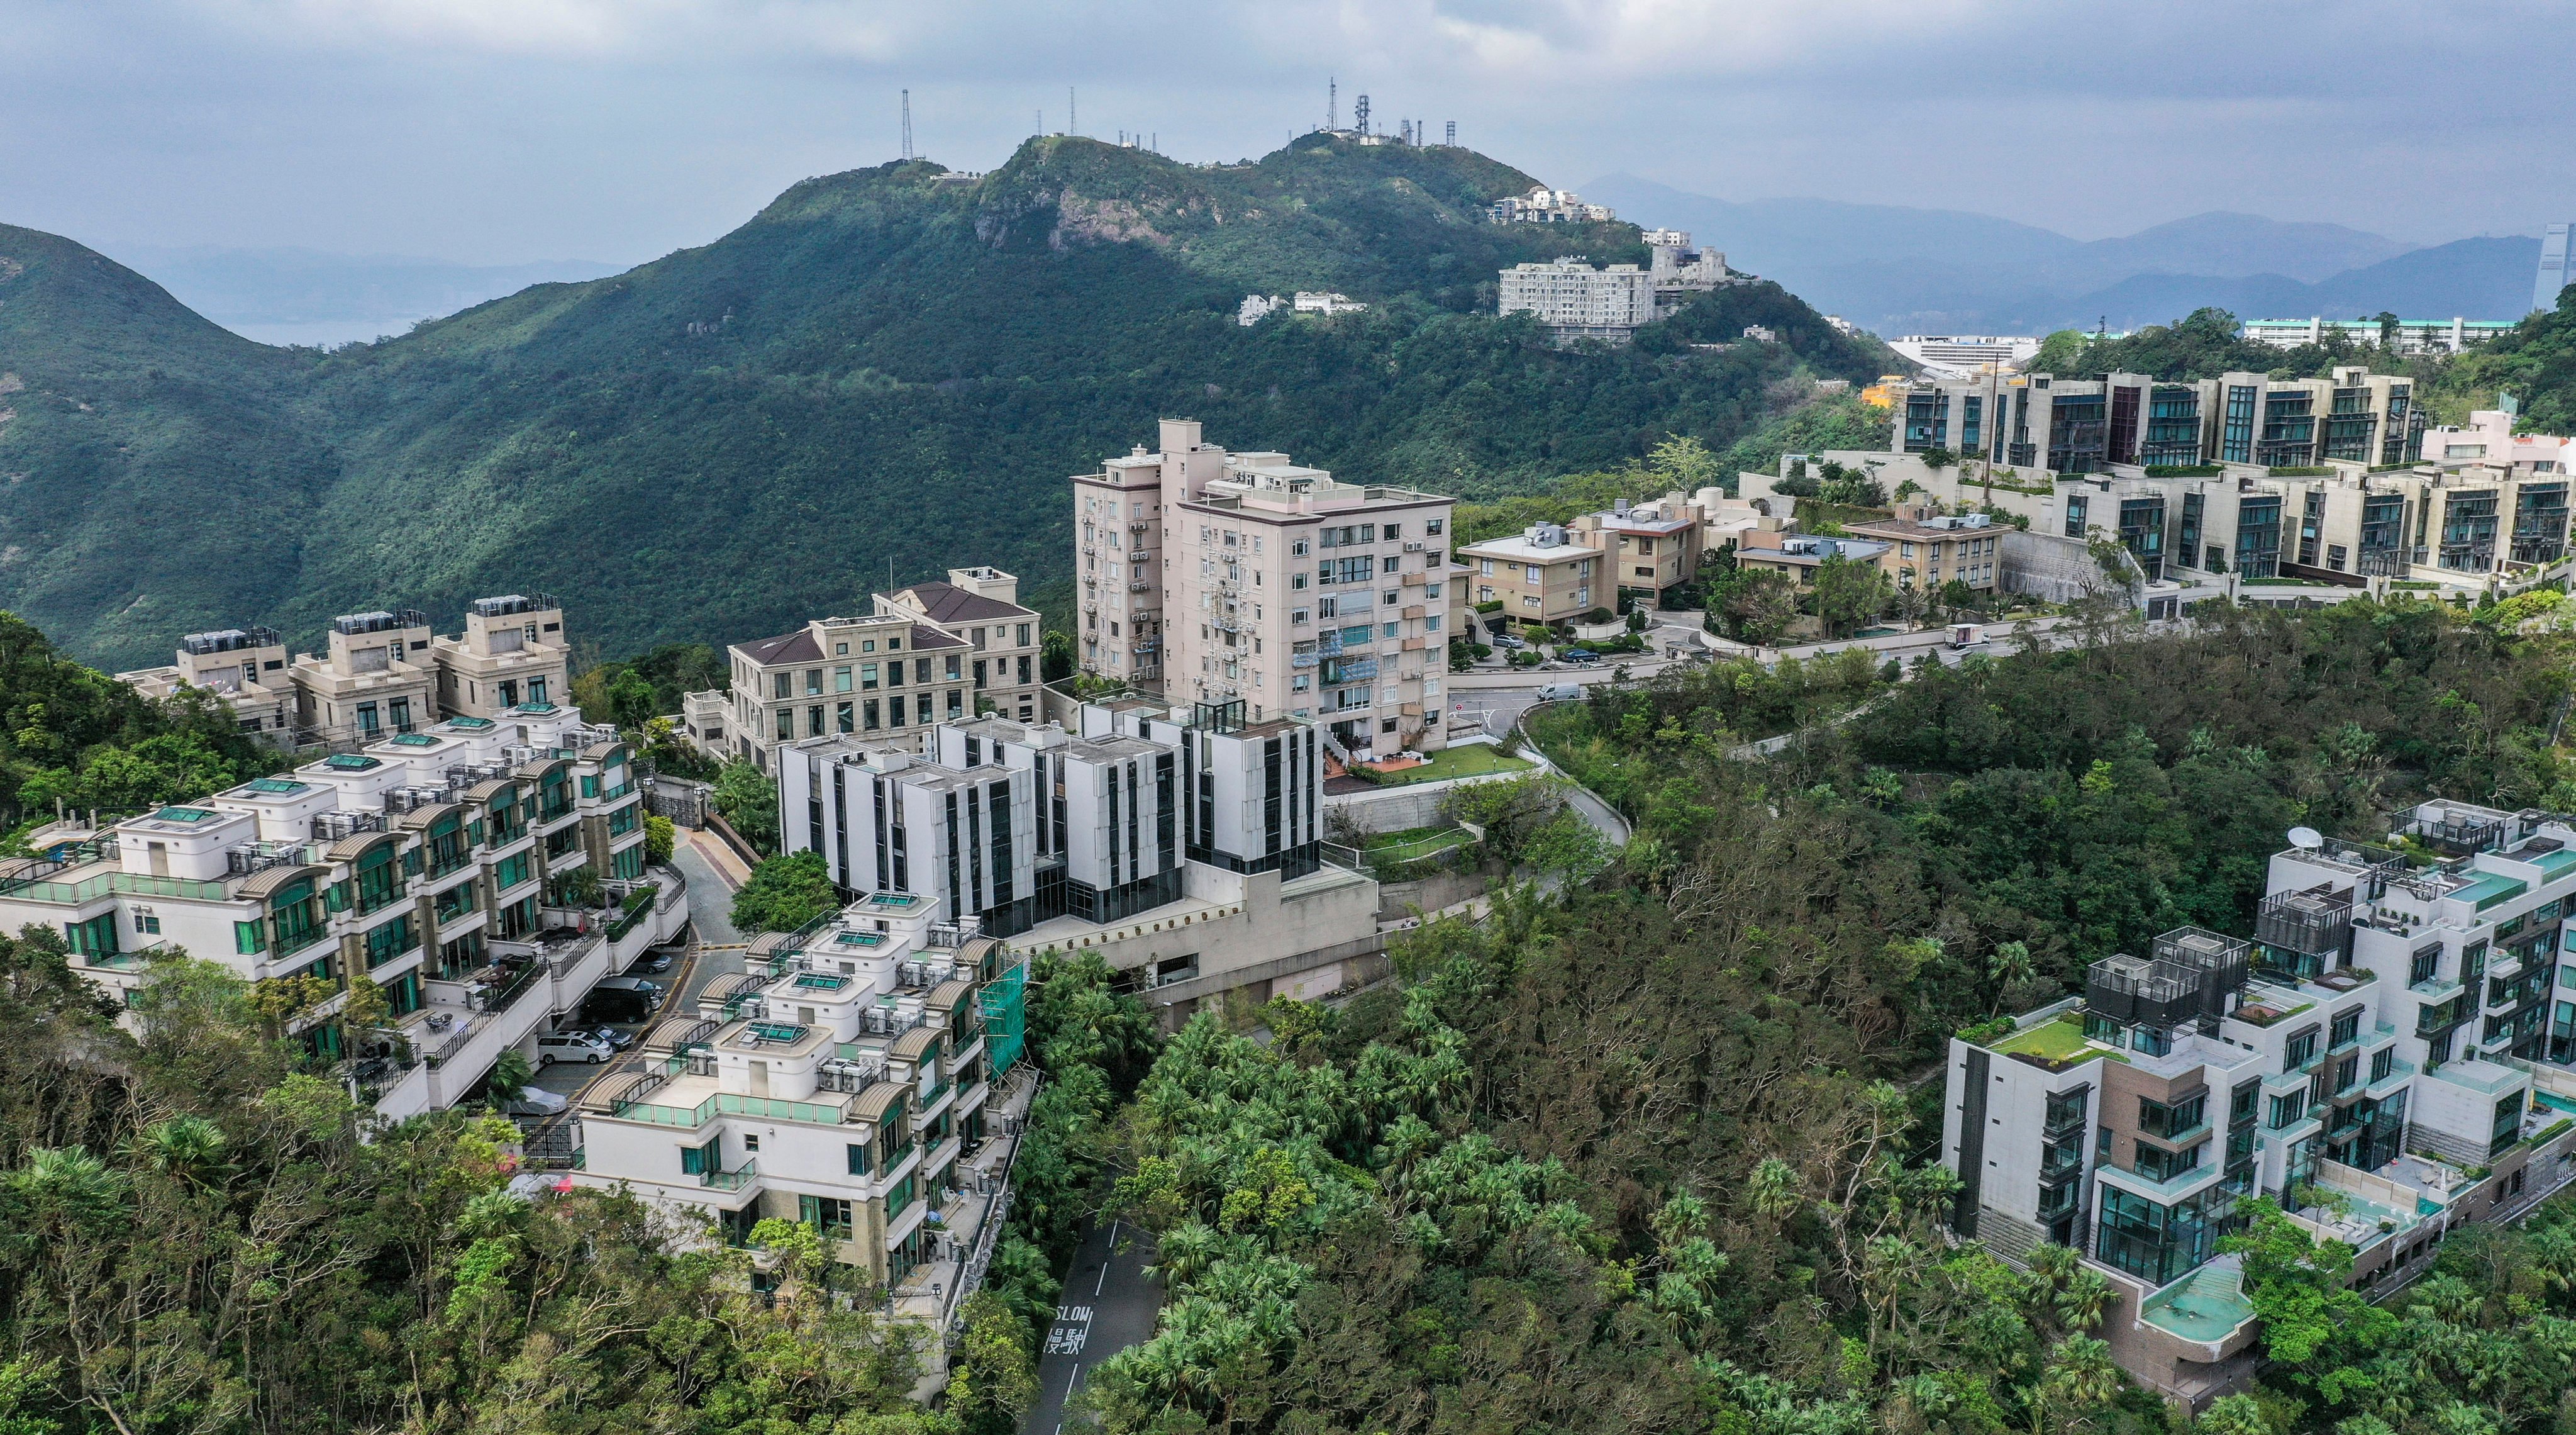 A bird’s-eye view of luxury flats and residential buildings along Mount Kellett Road at The Peak. Photo: SCMP